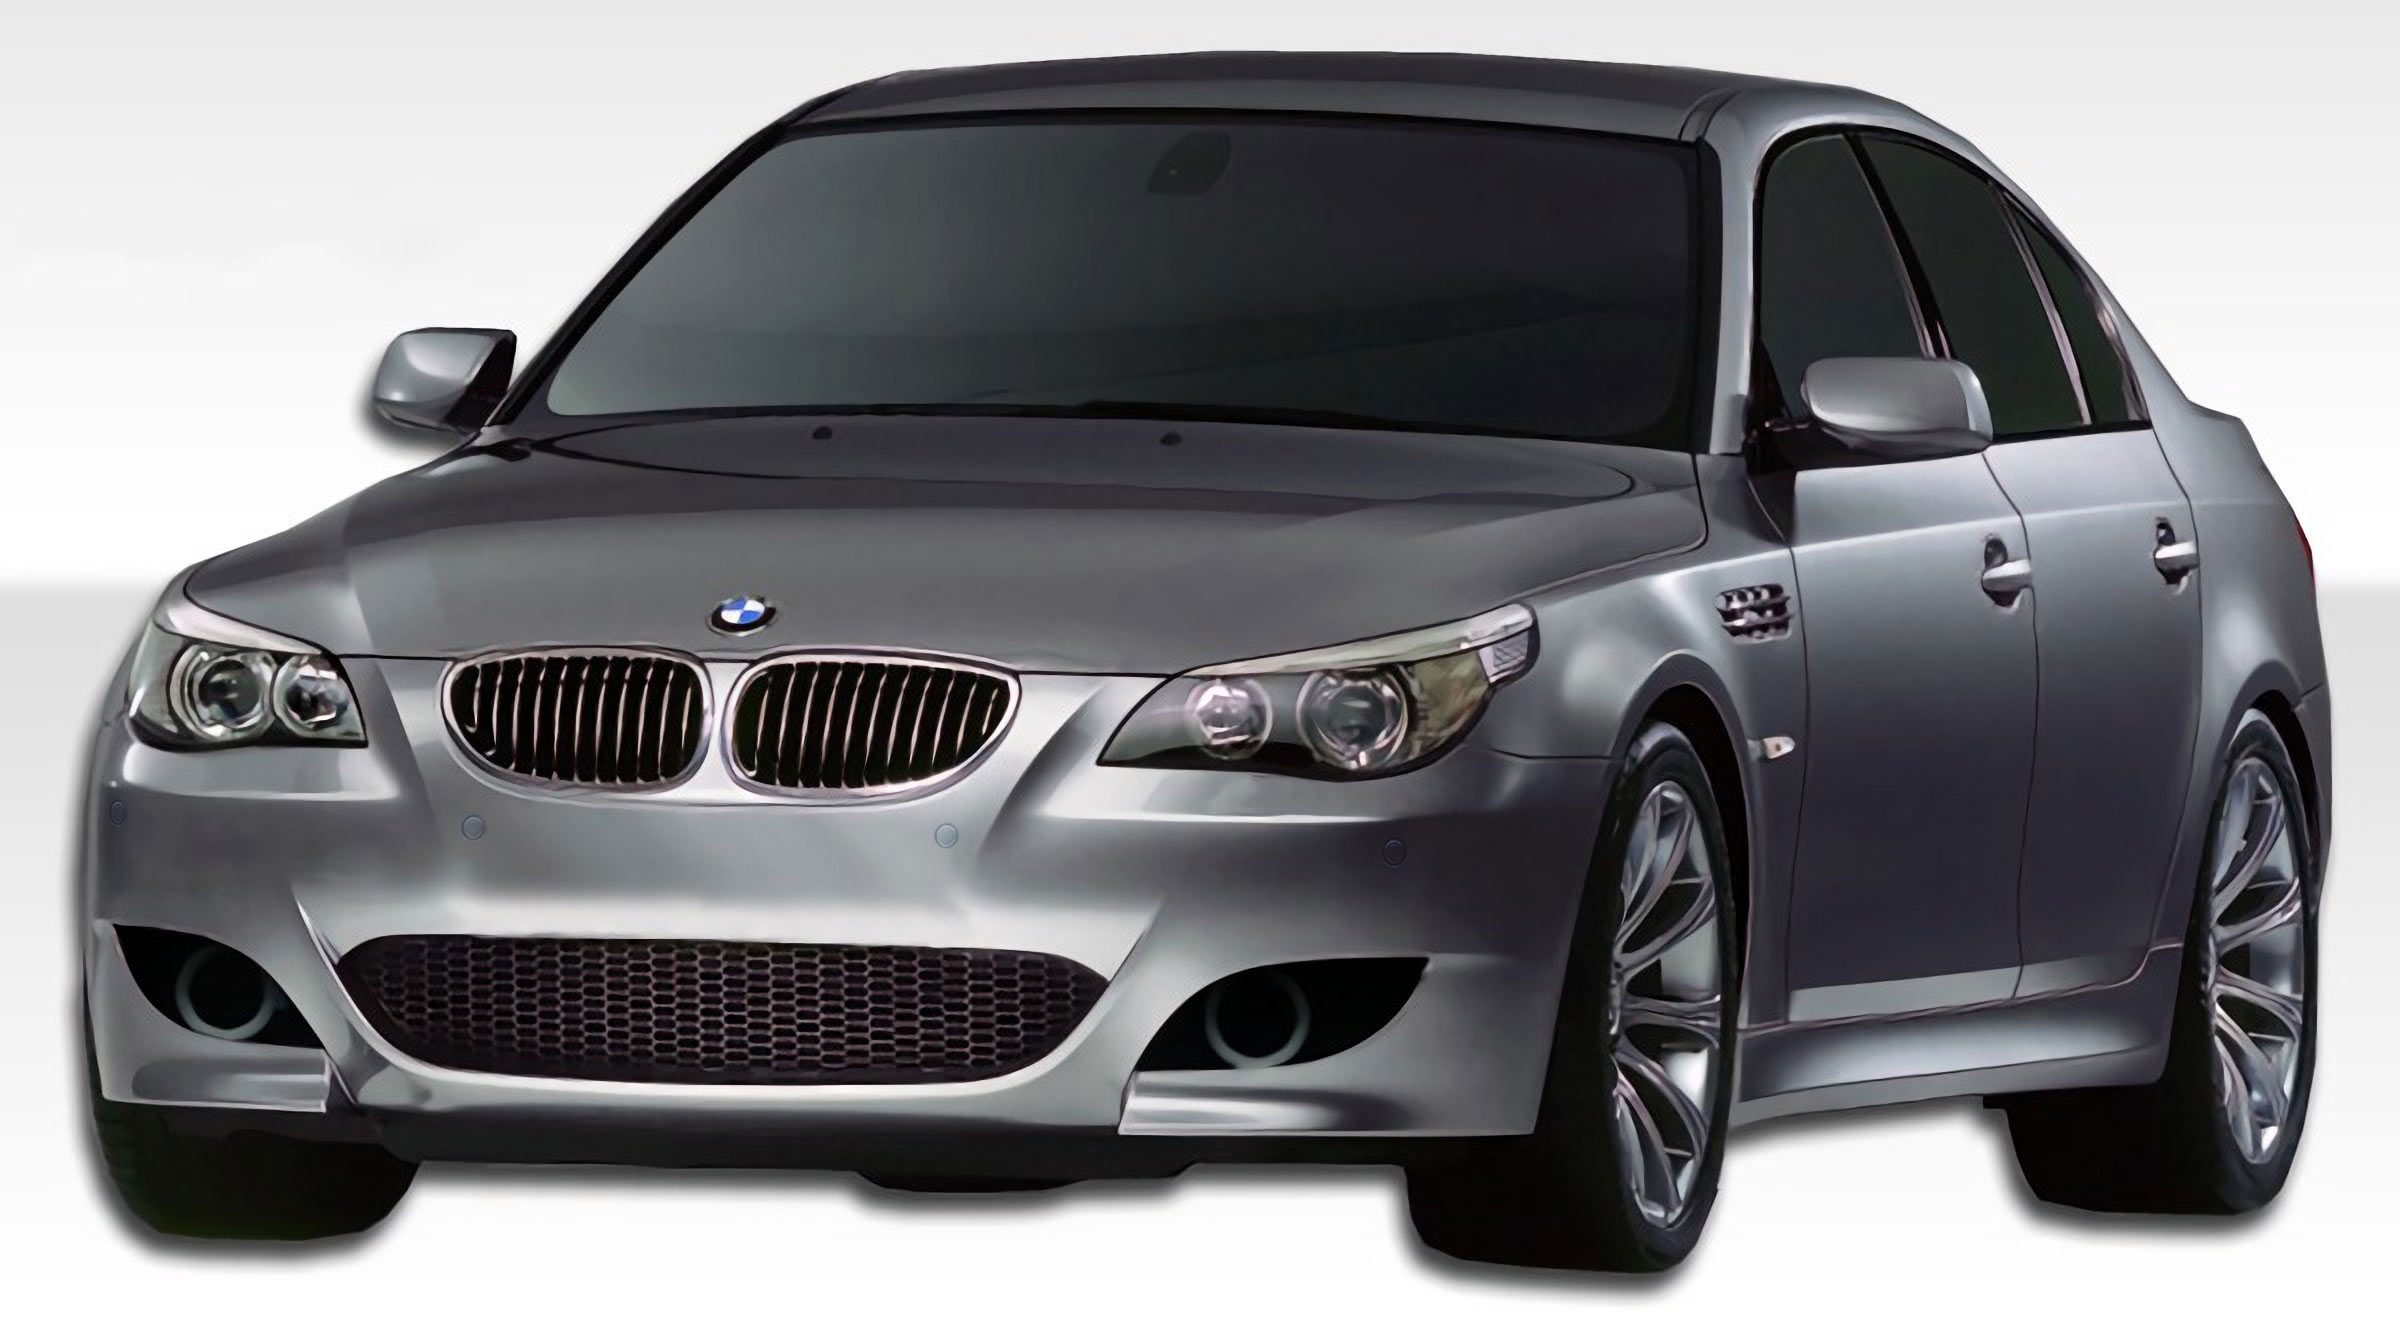 Welcome to Extreme Dimensions :: Item Group :: 2004-2010 BMW 5 Series E60 Duraflex M5 ...2400 x 1320